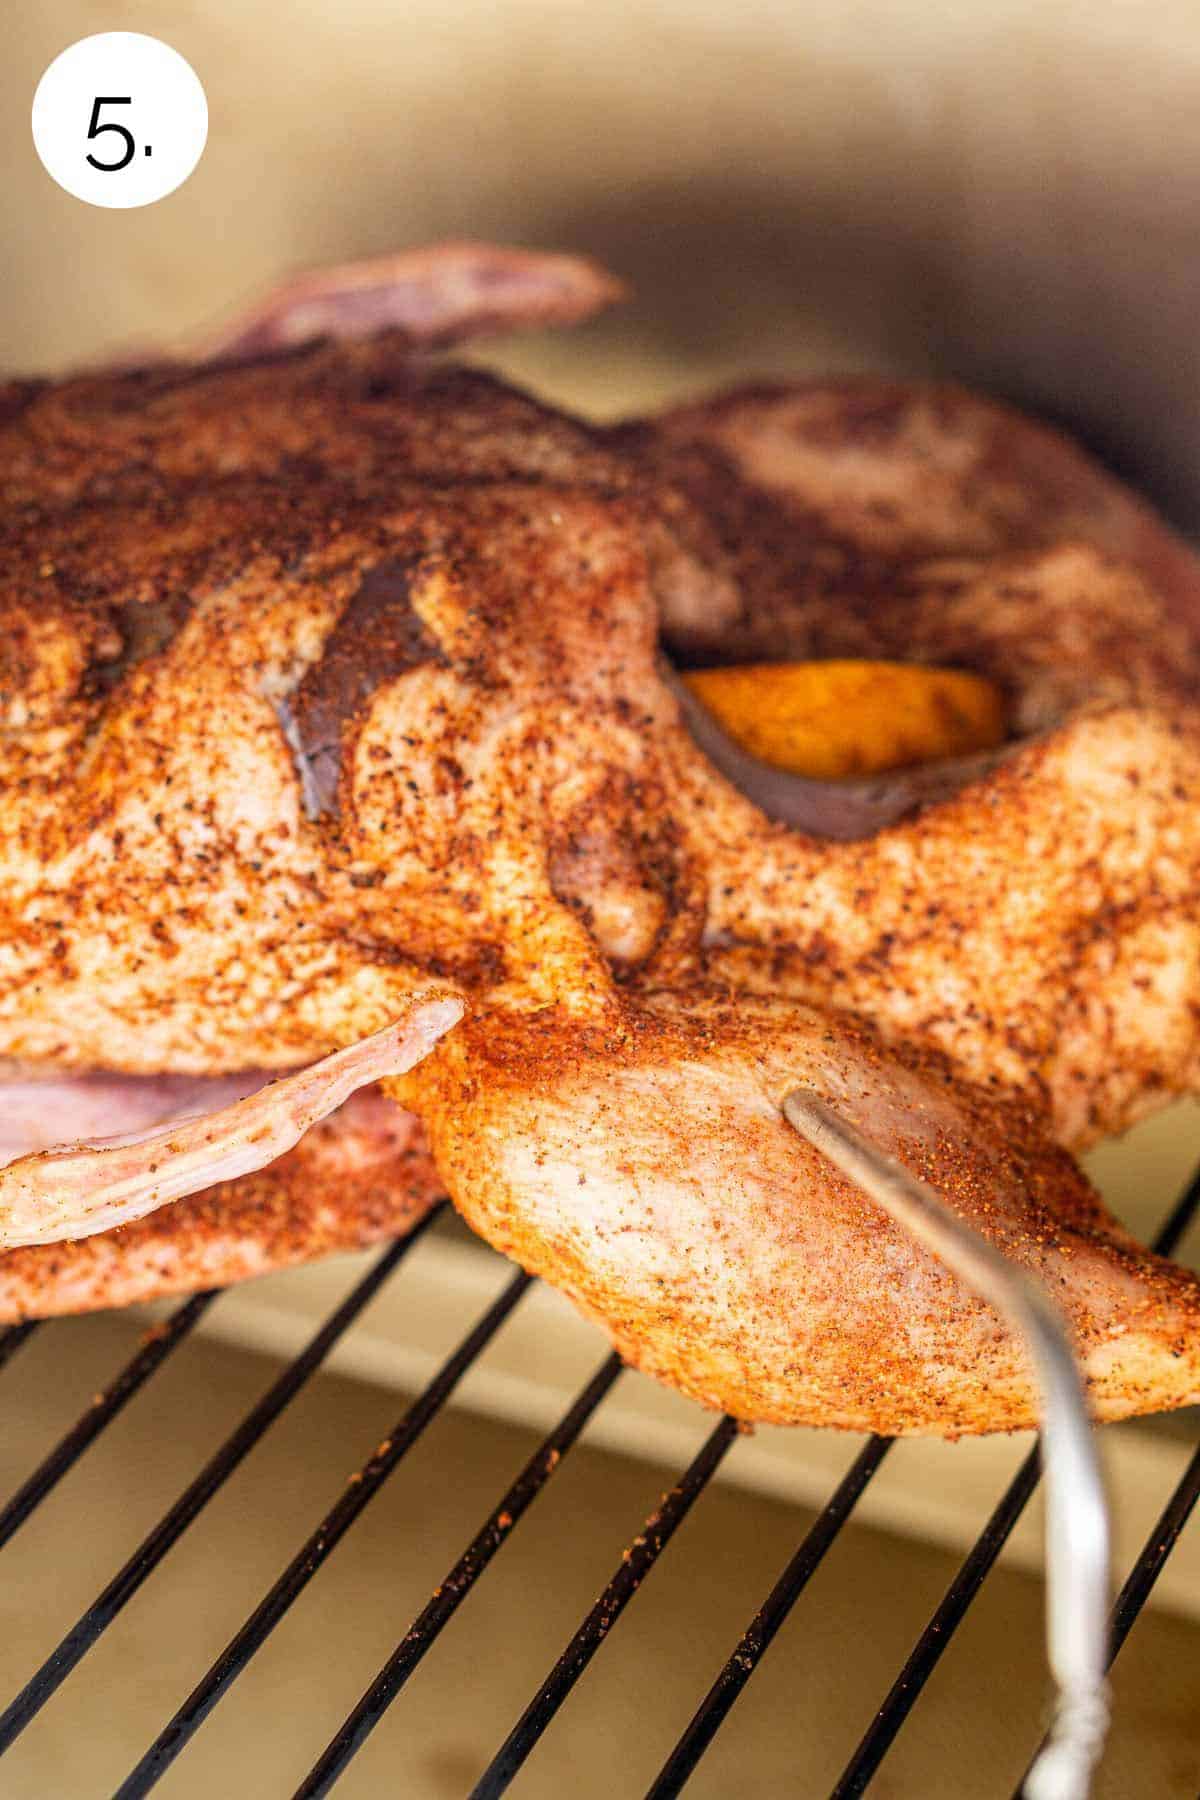 The bird on the grill grates ready to smoke with a probe thermometer stuck in the thigh.